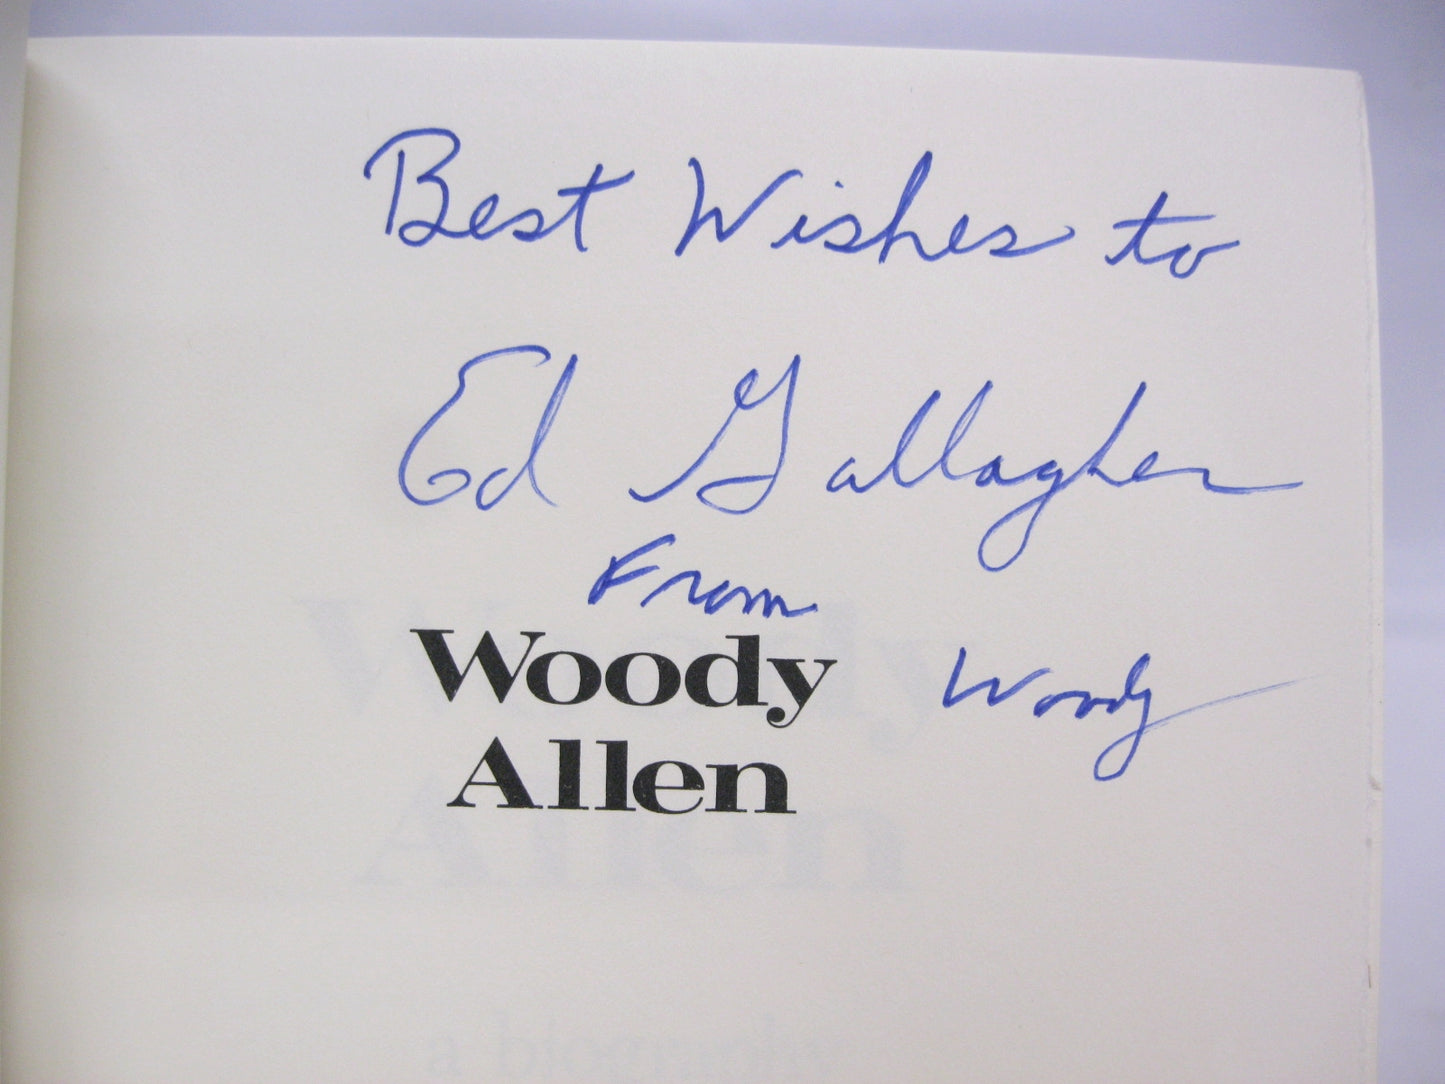 Woody Allen a Biography by Eric Lax